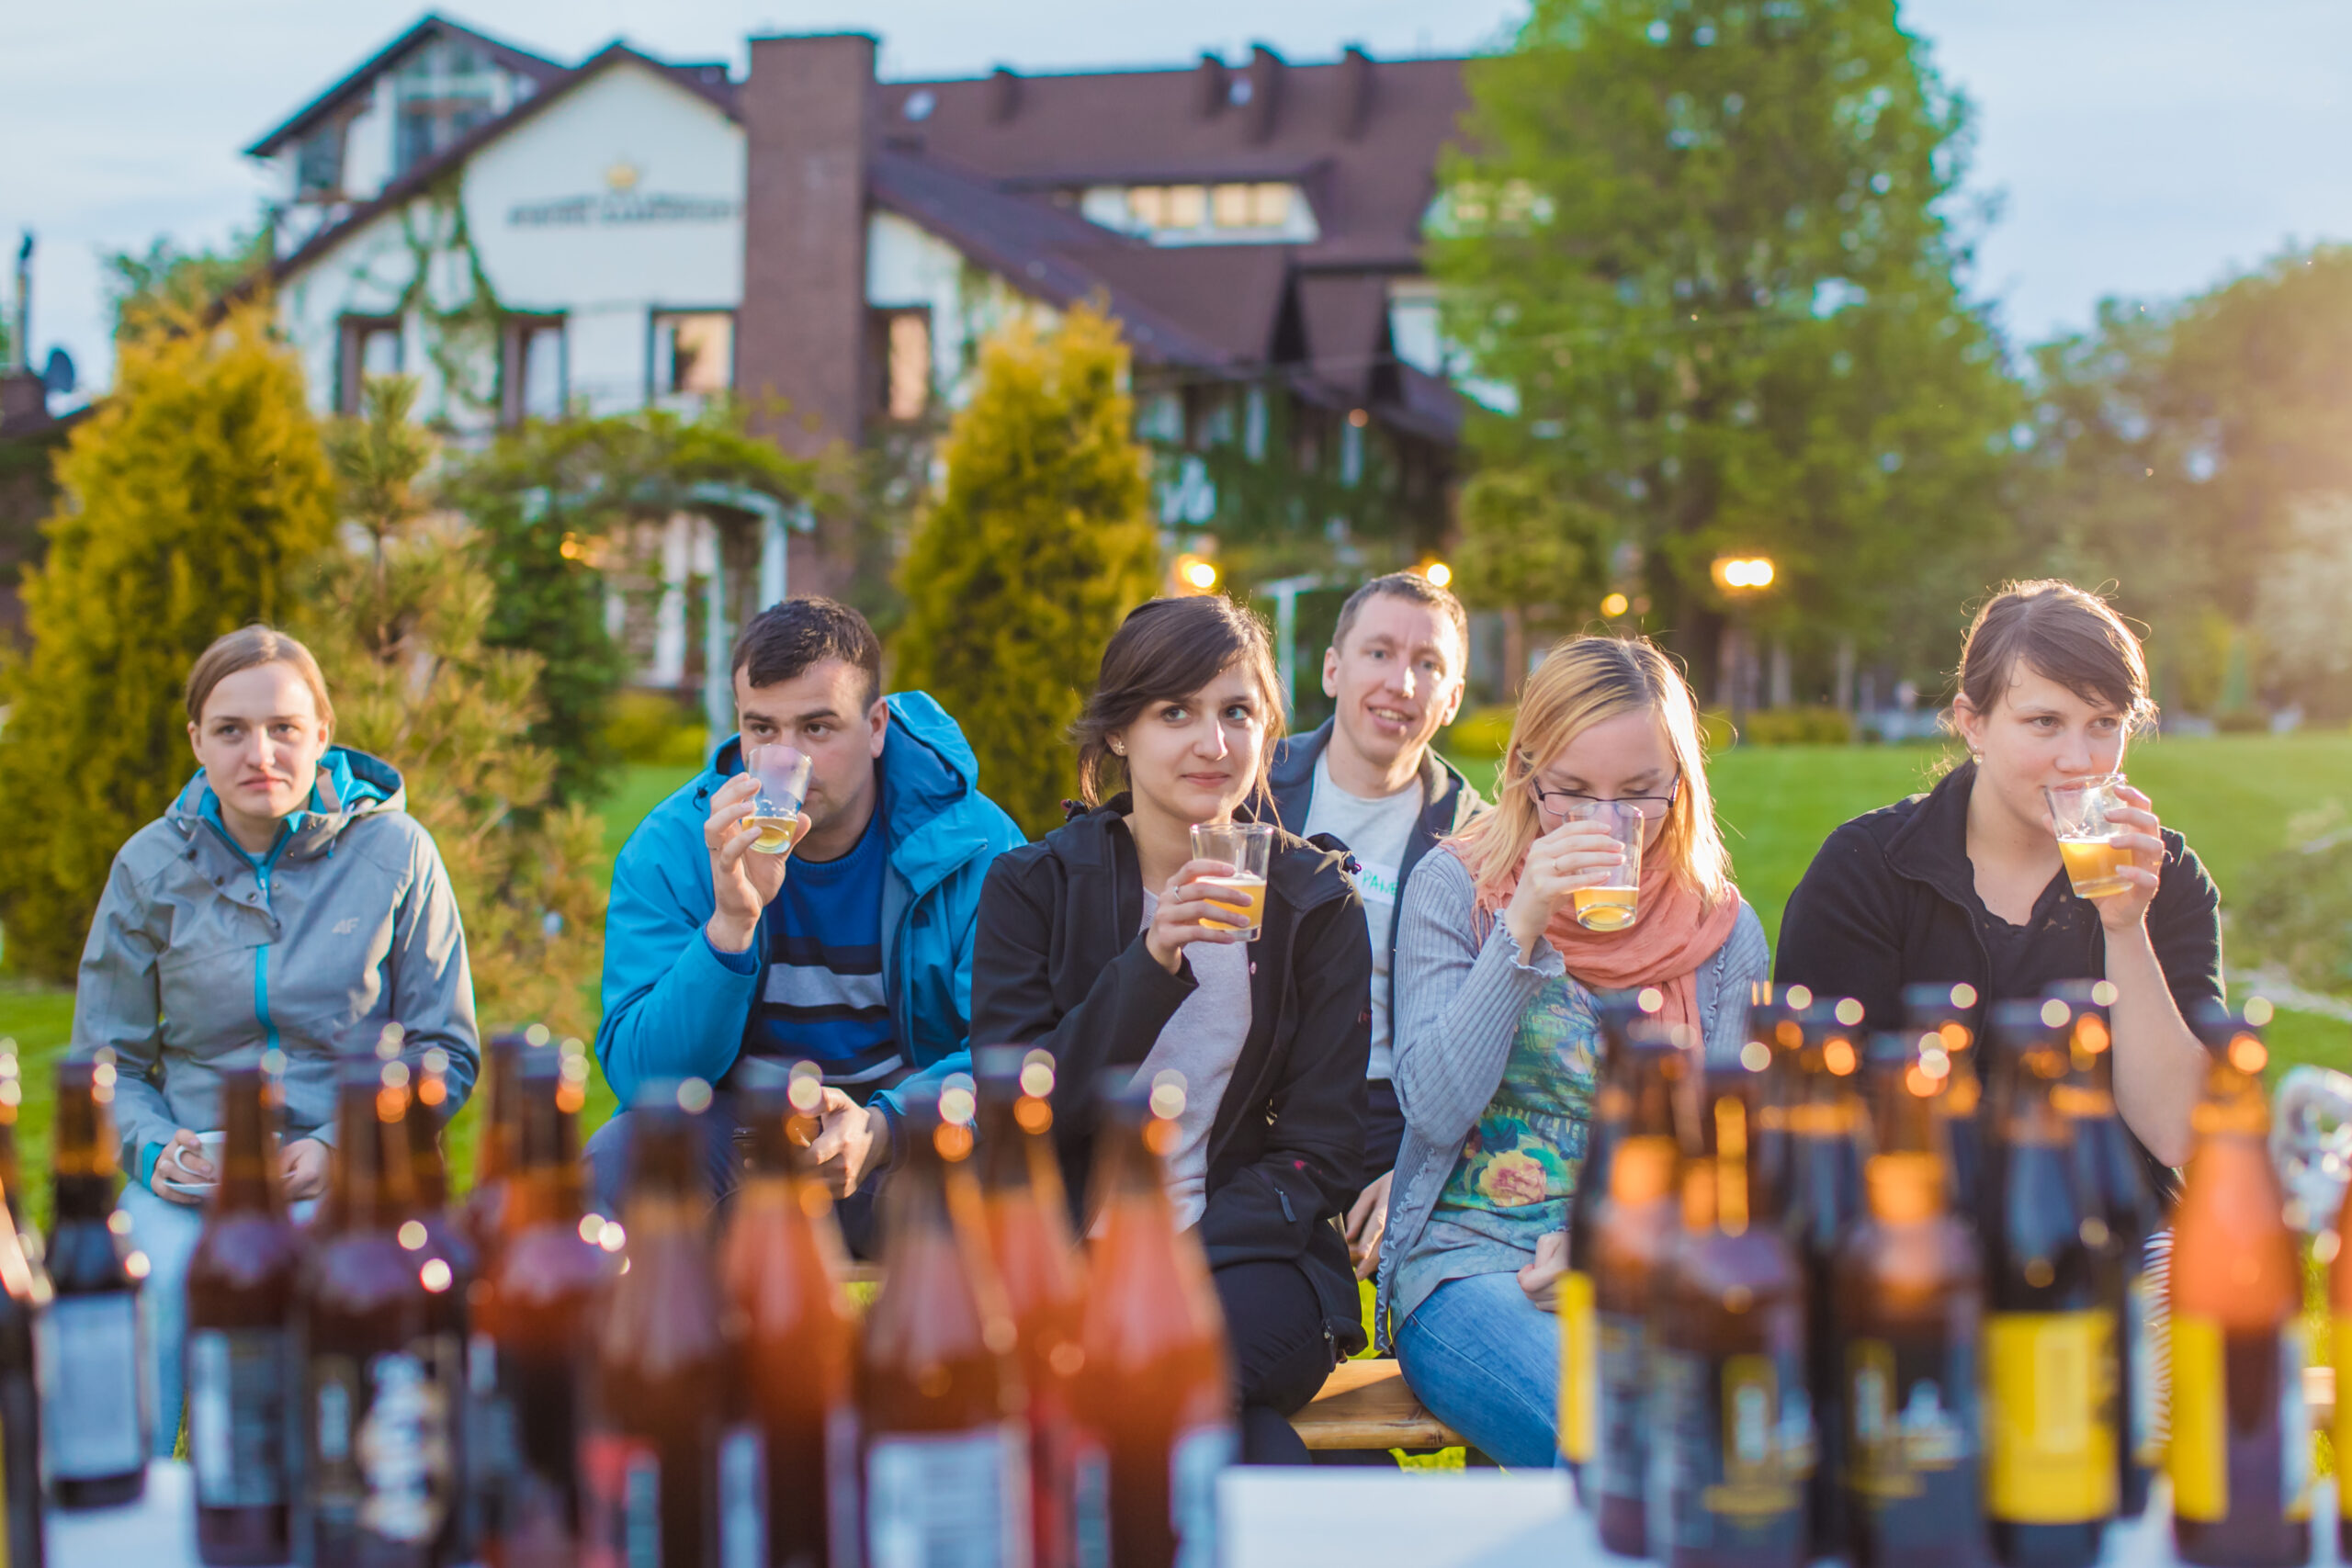 Beer tasting and workshops at an outdoor integration meeting